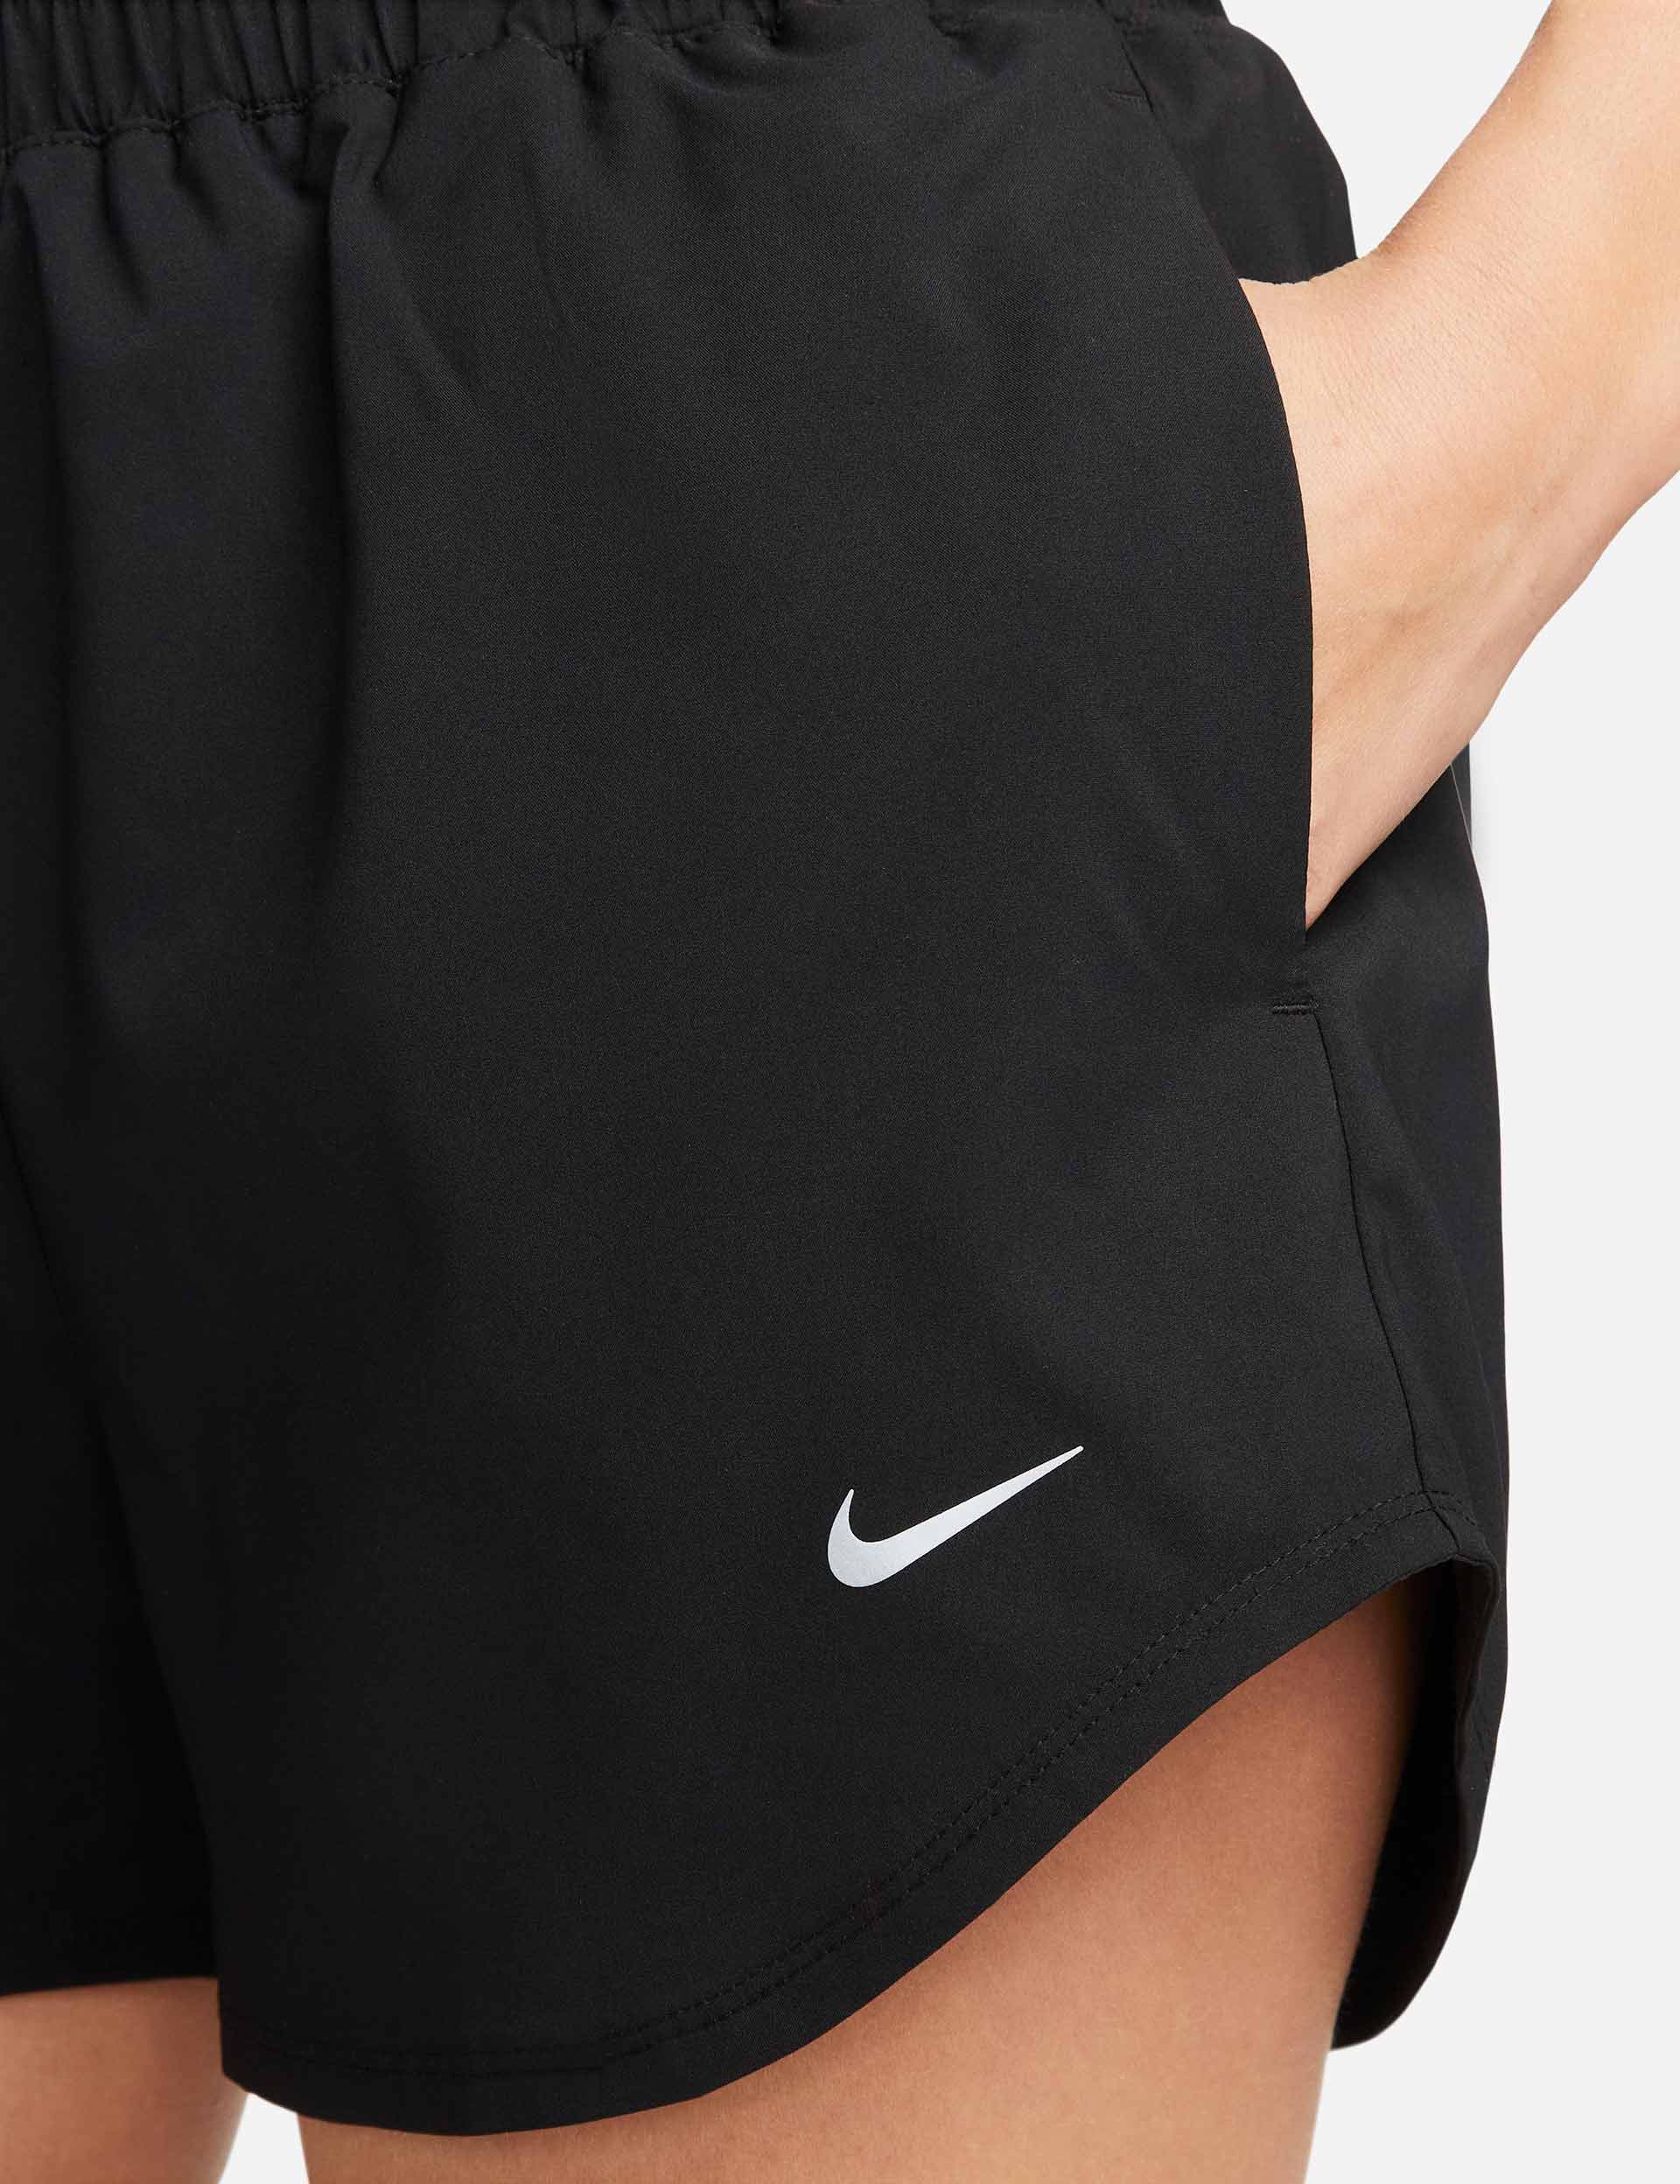 Nike, One Ultra High 3 Brief-Lined Shorts - Black